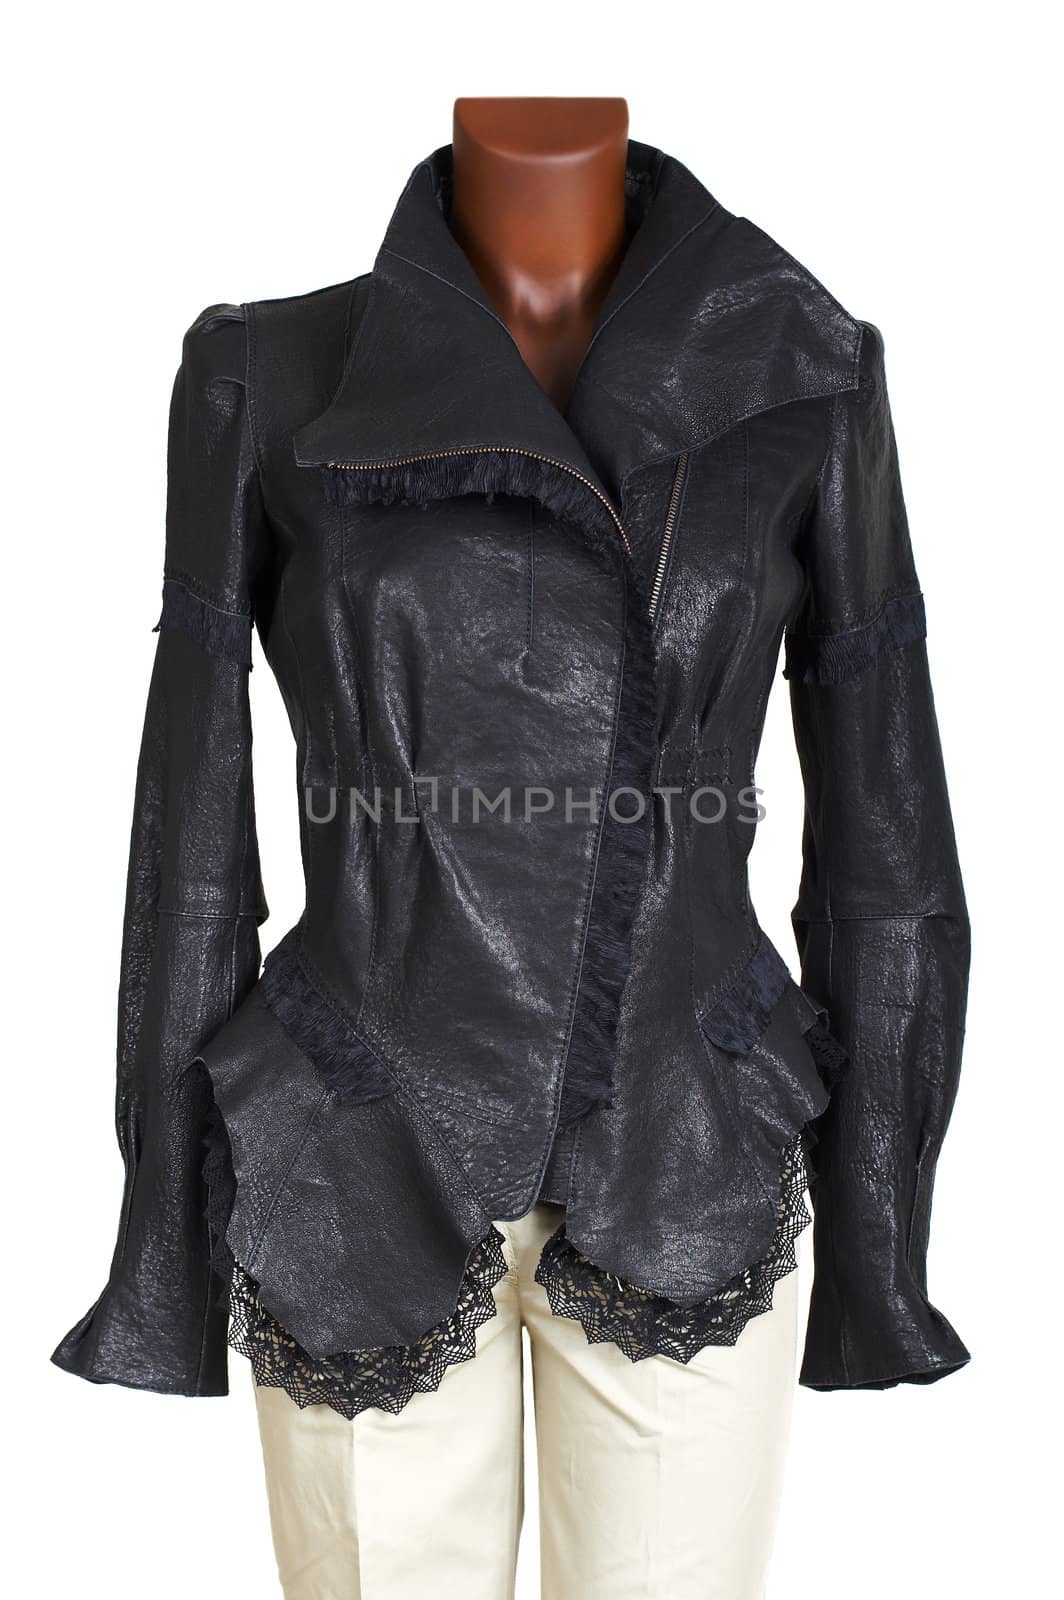 Female leather jacket by terex